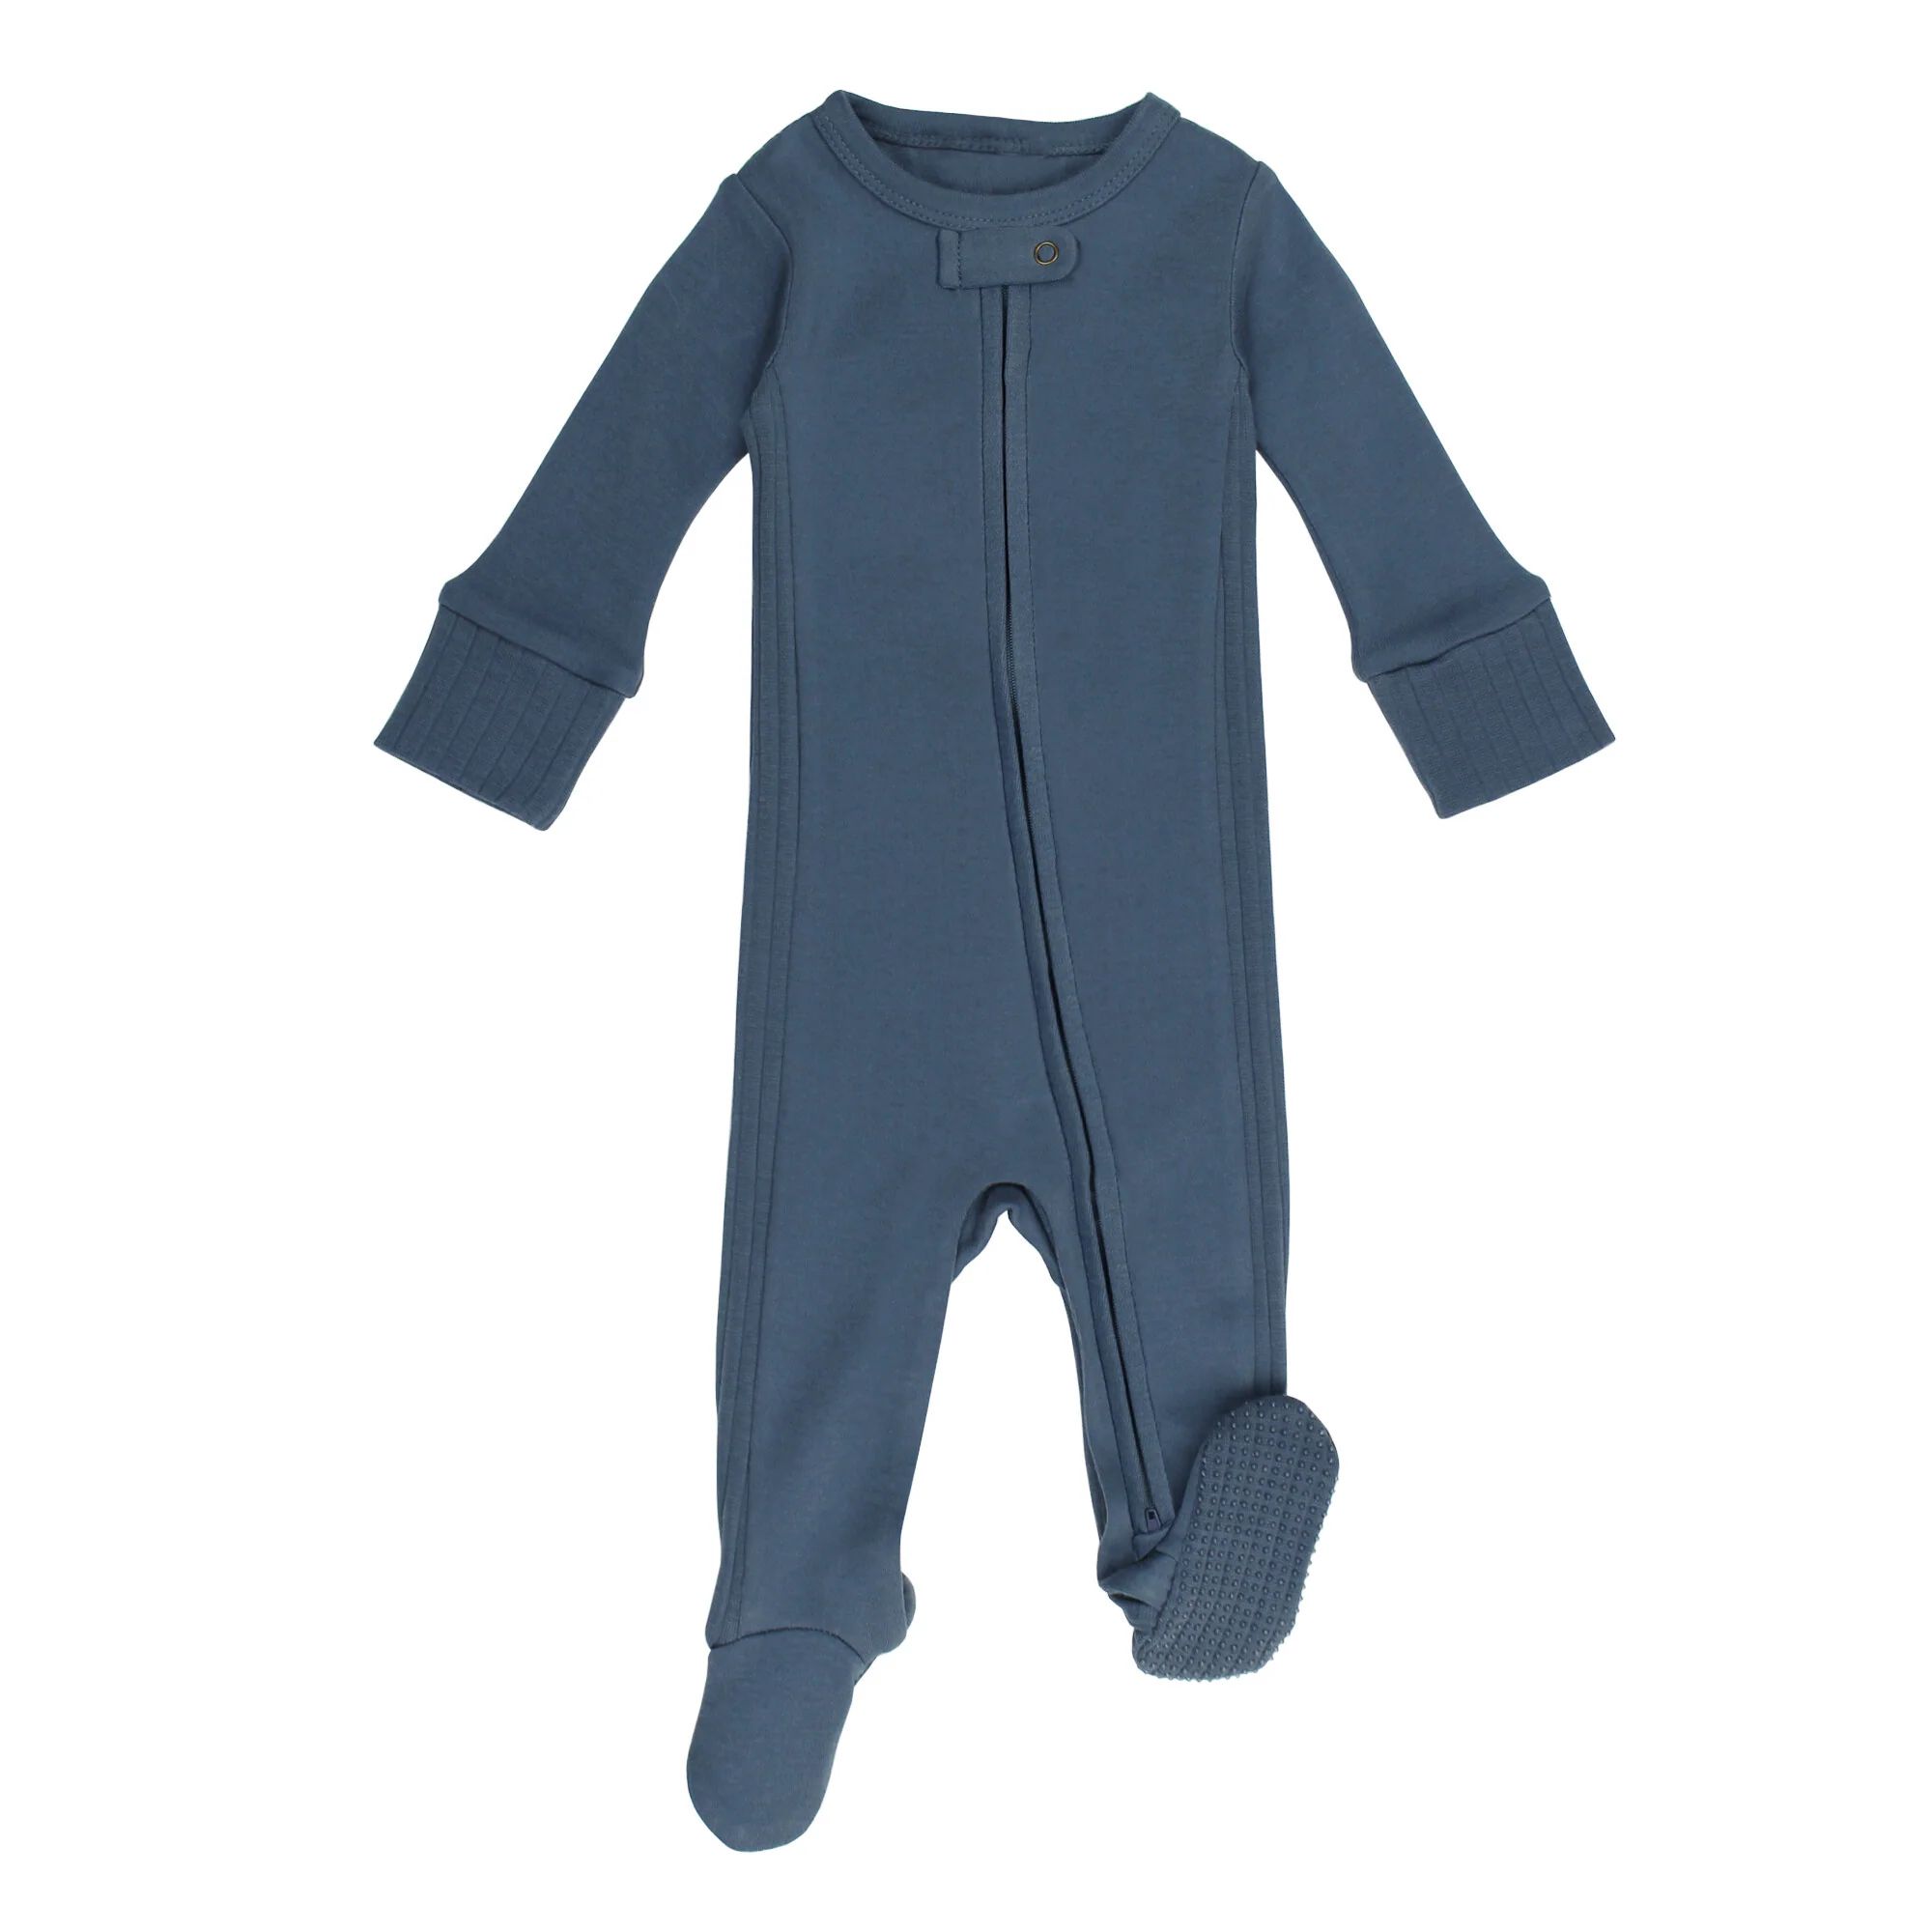 Organic Ribbed Zipper Footie in Dolphin | L'ovedbaby